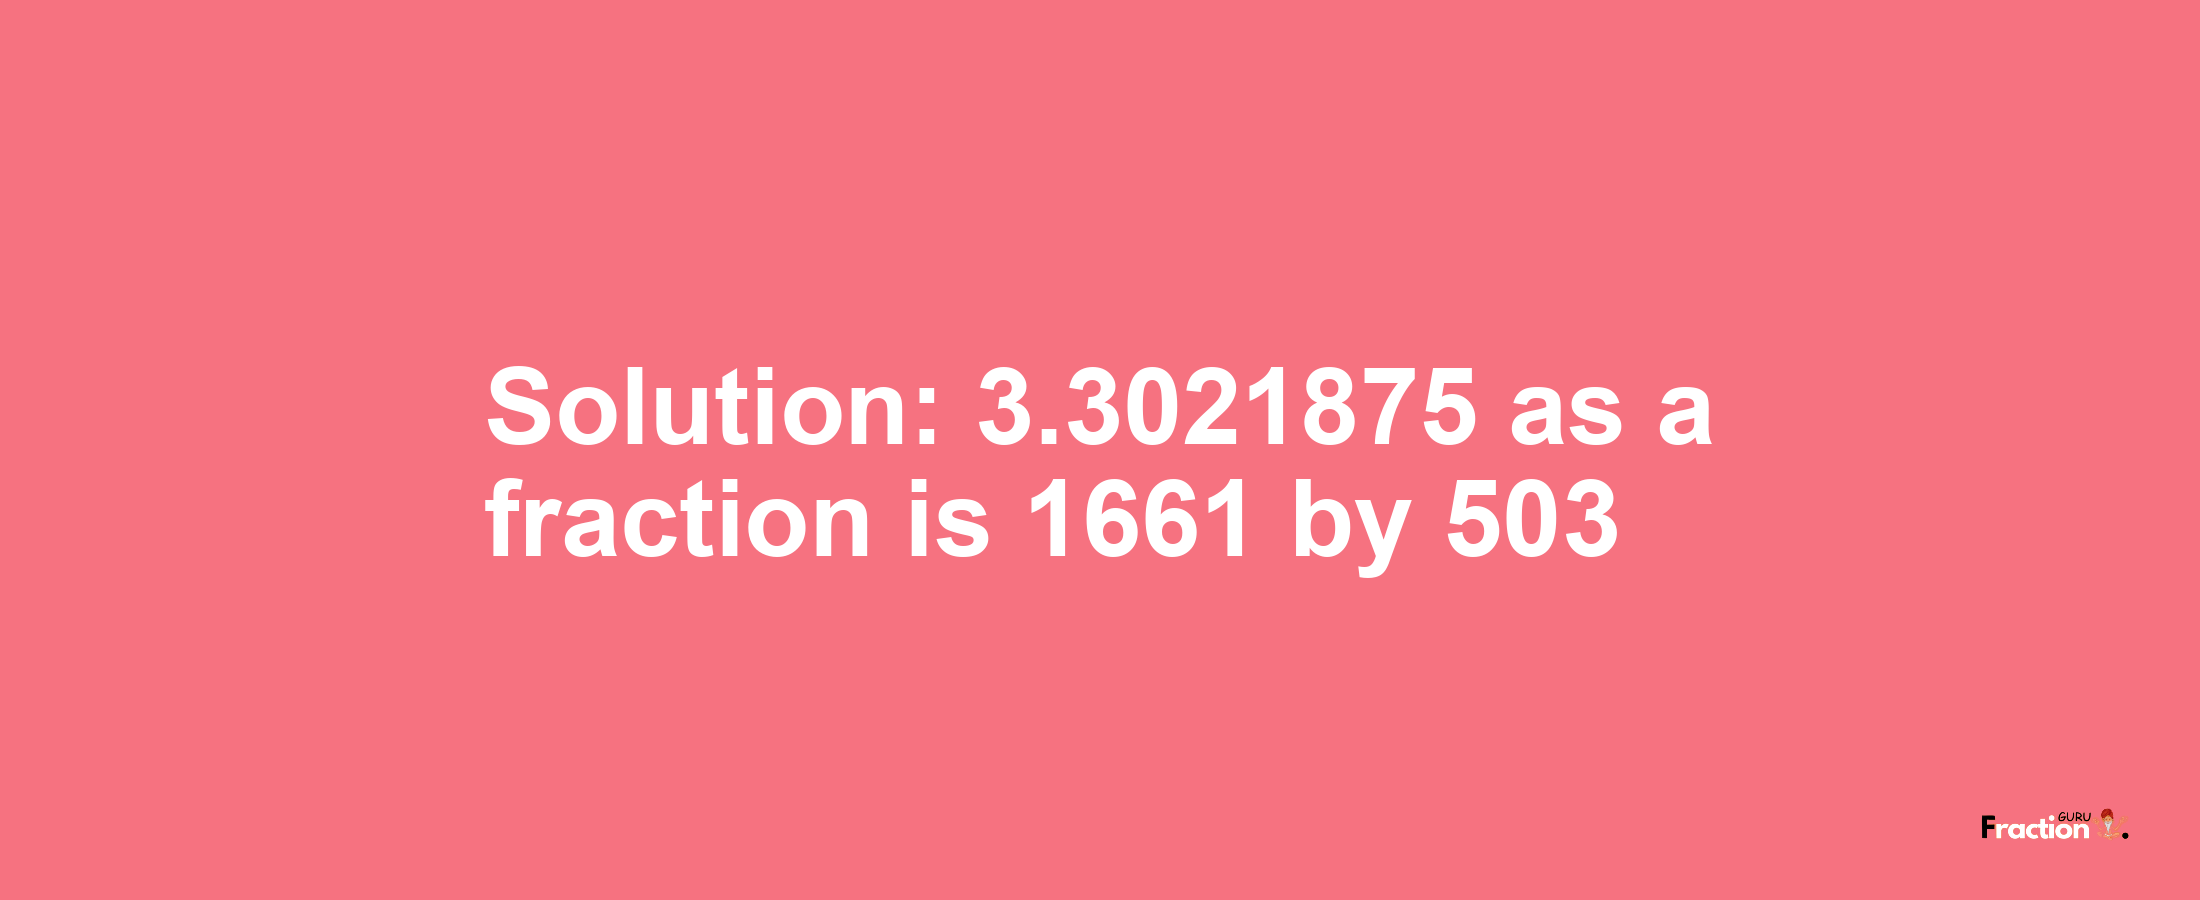 Solution:3.3021875 as a fraction is 1661/503